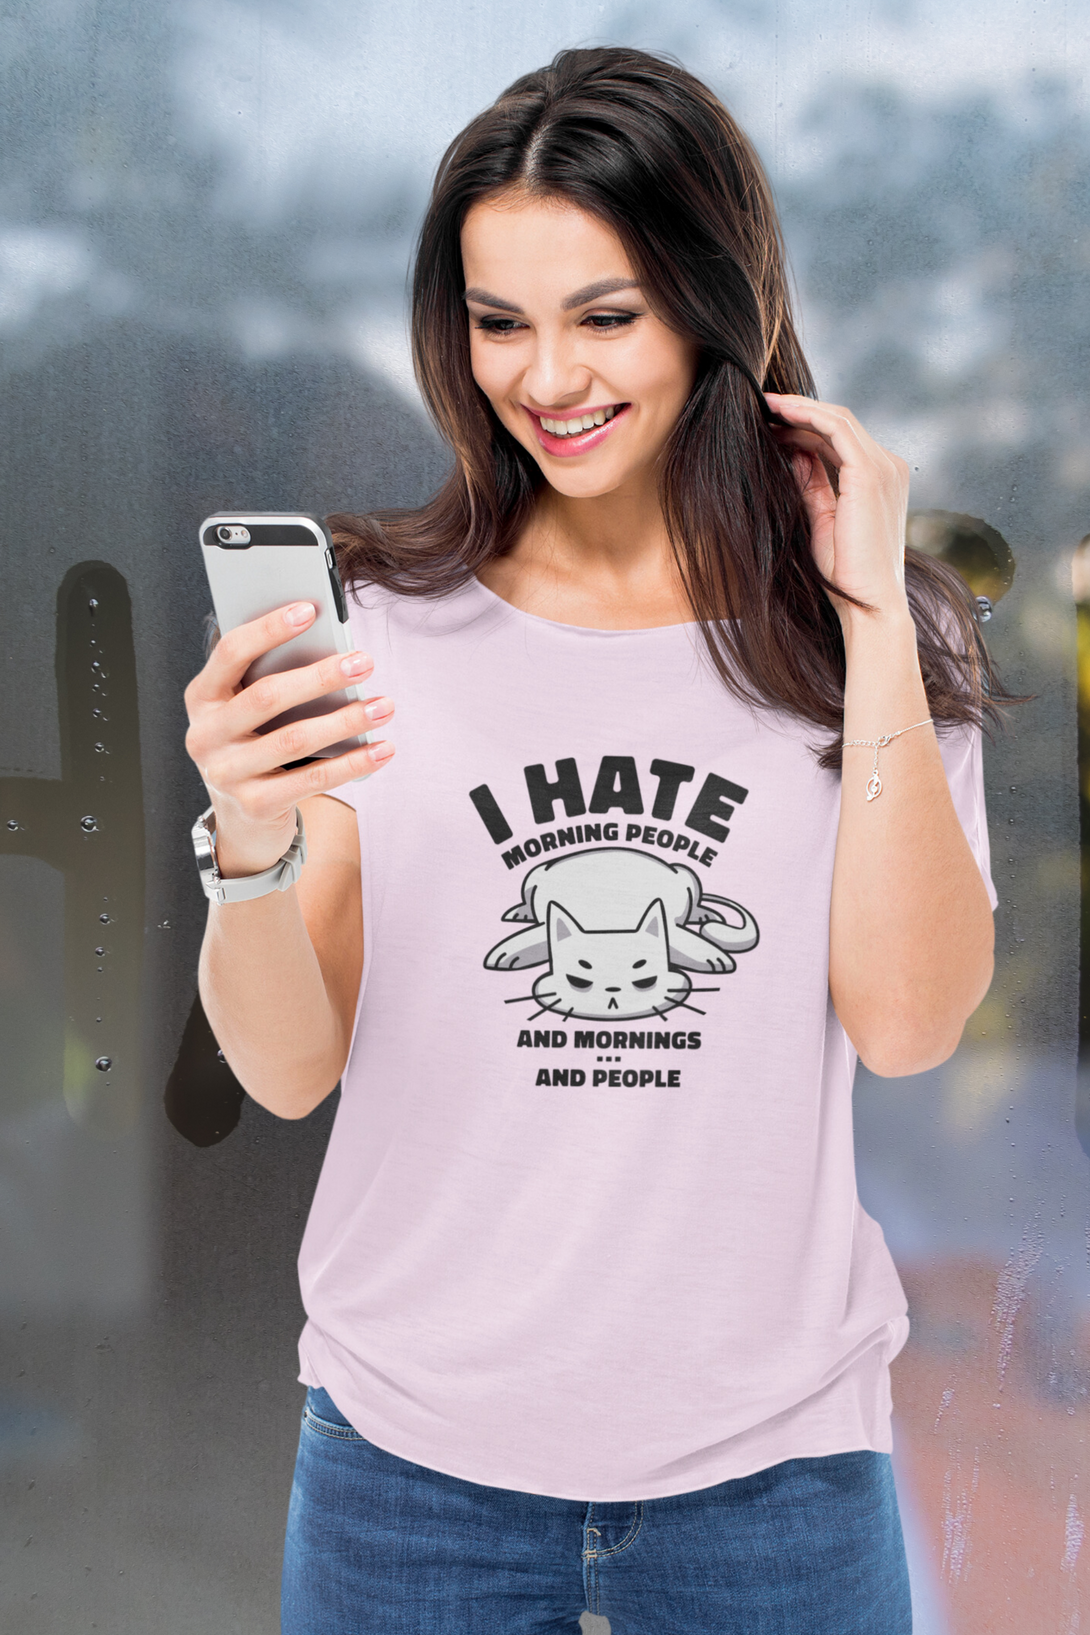 Angry Cat Printed T-Shirt For Women - WowWaves - 3